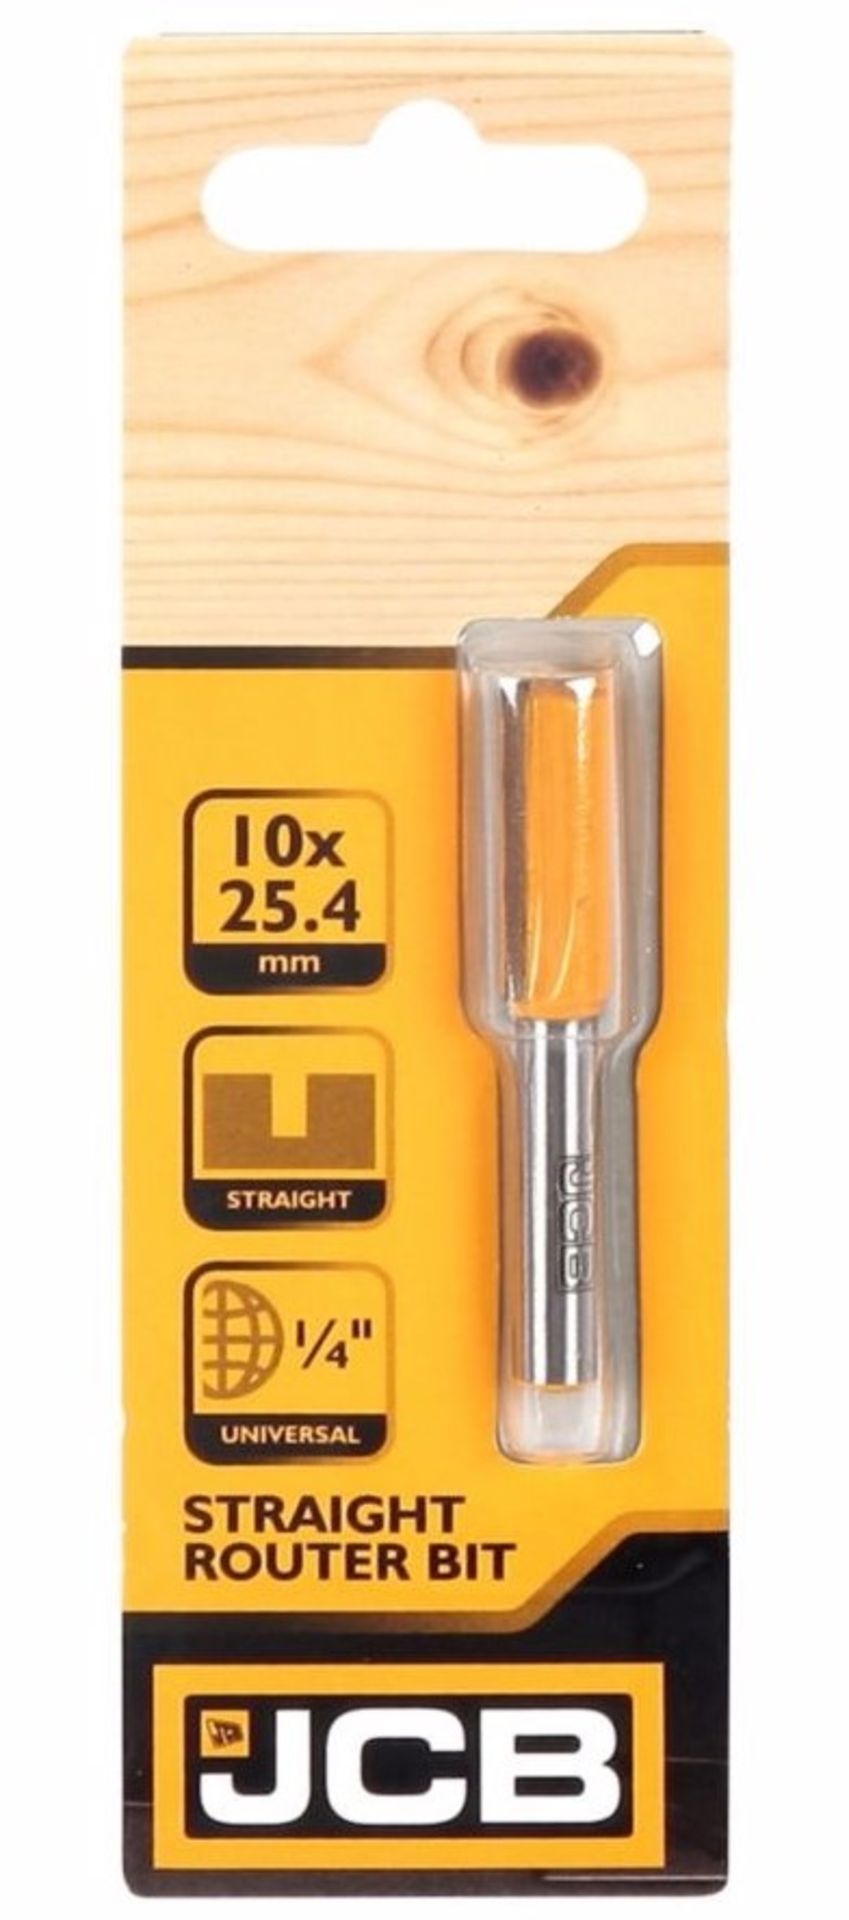 RRP £66.55 BATCH OF 8 STRAIGHT ROUTER BITS  Batch of 8 JCB Straight Router Bits of various sizes